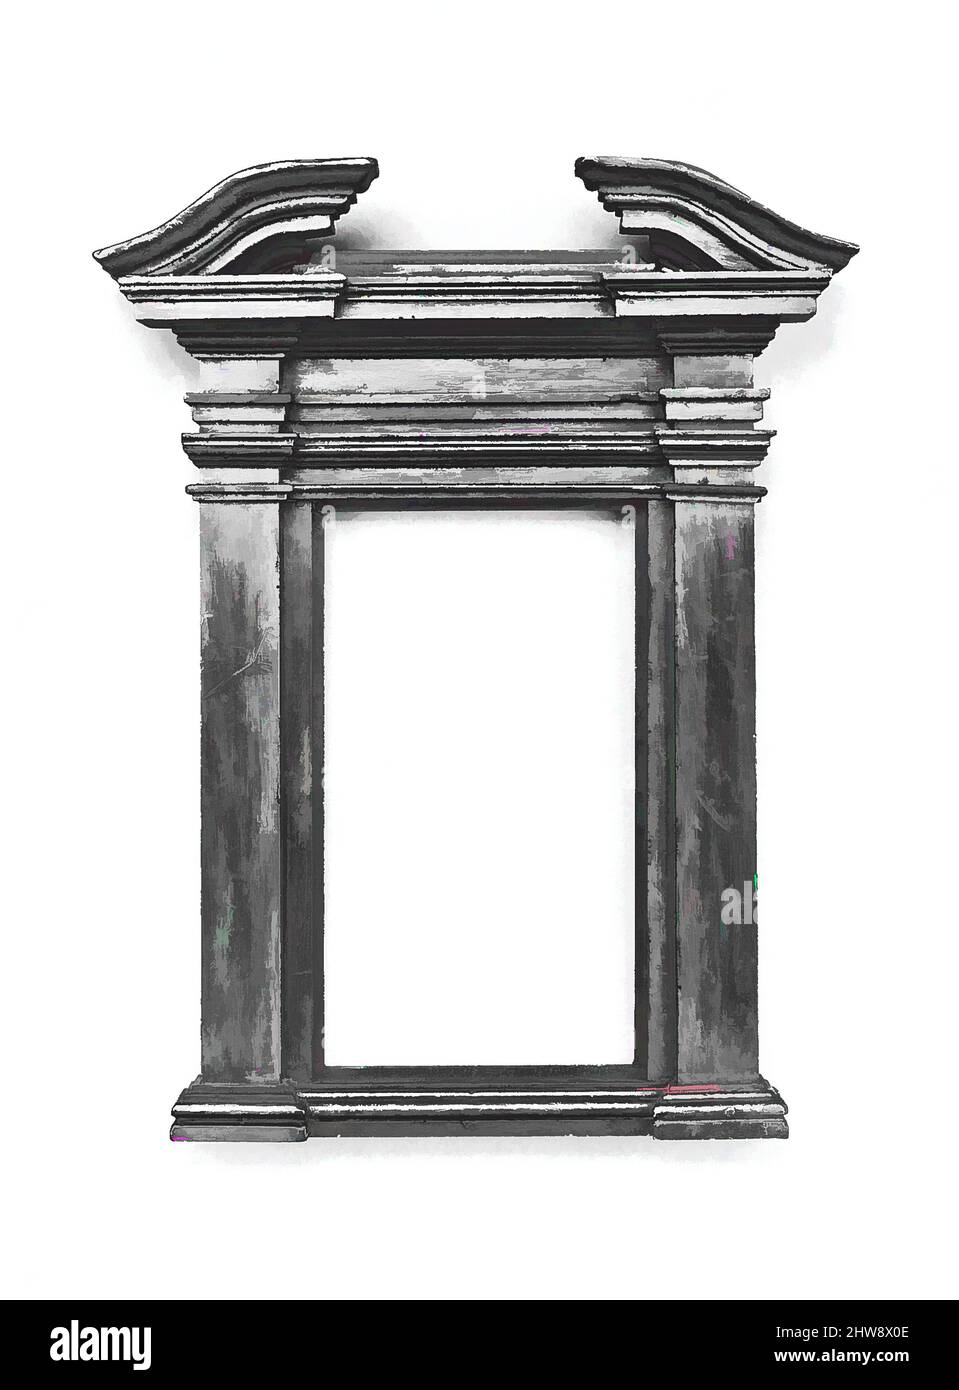 Art inspired by Tabernacle frame, style late 16th century, made 19th century, Italian, Tuscan, Walnut, Overall: 20 3/4 x 16 in, Frames, Classic works modernized by Artotop with a splash of modernity. Shapes, color and value, eye-catching visual impact on art. Emotions through freedom of artworks in a contemporary way. A timeless message pursuing a wildly creative new direction. Artists turning to the digital medium and creating the Artotop NFT Stock Photo